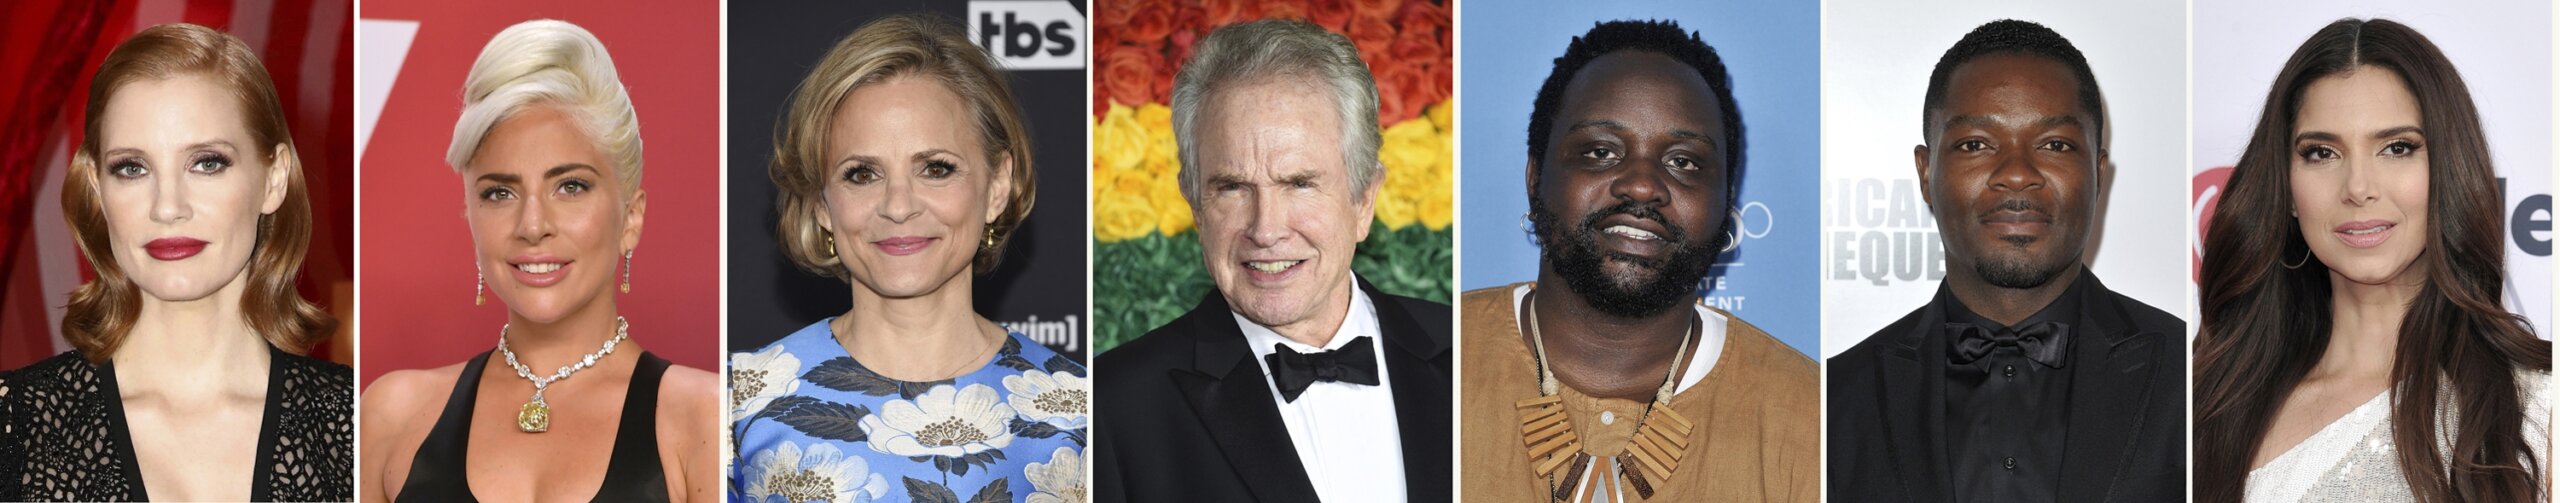 Celebrity Birthdays For The Week Of March April Wtop News